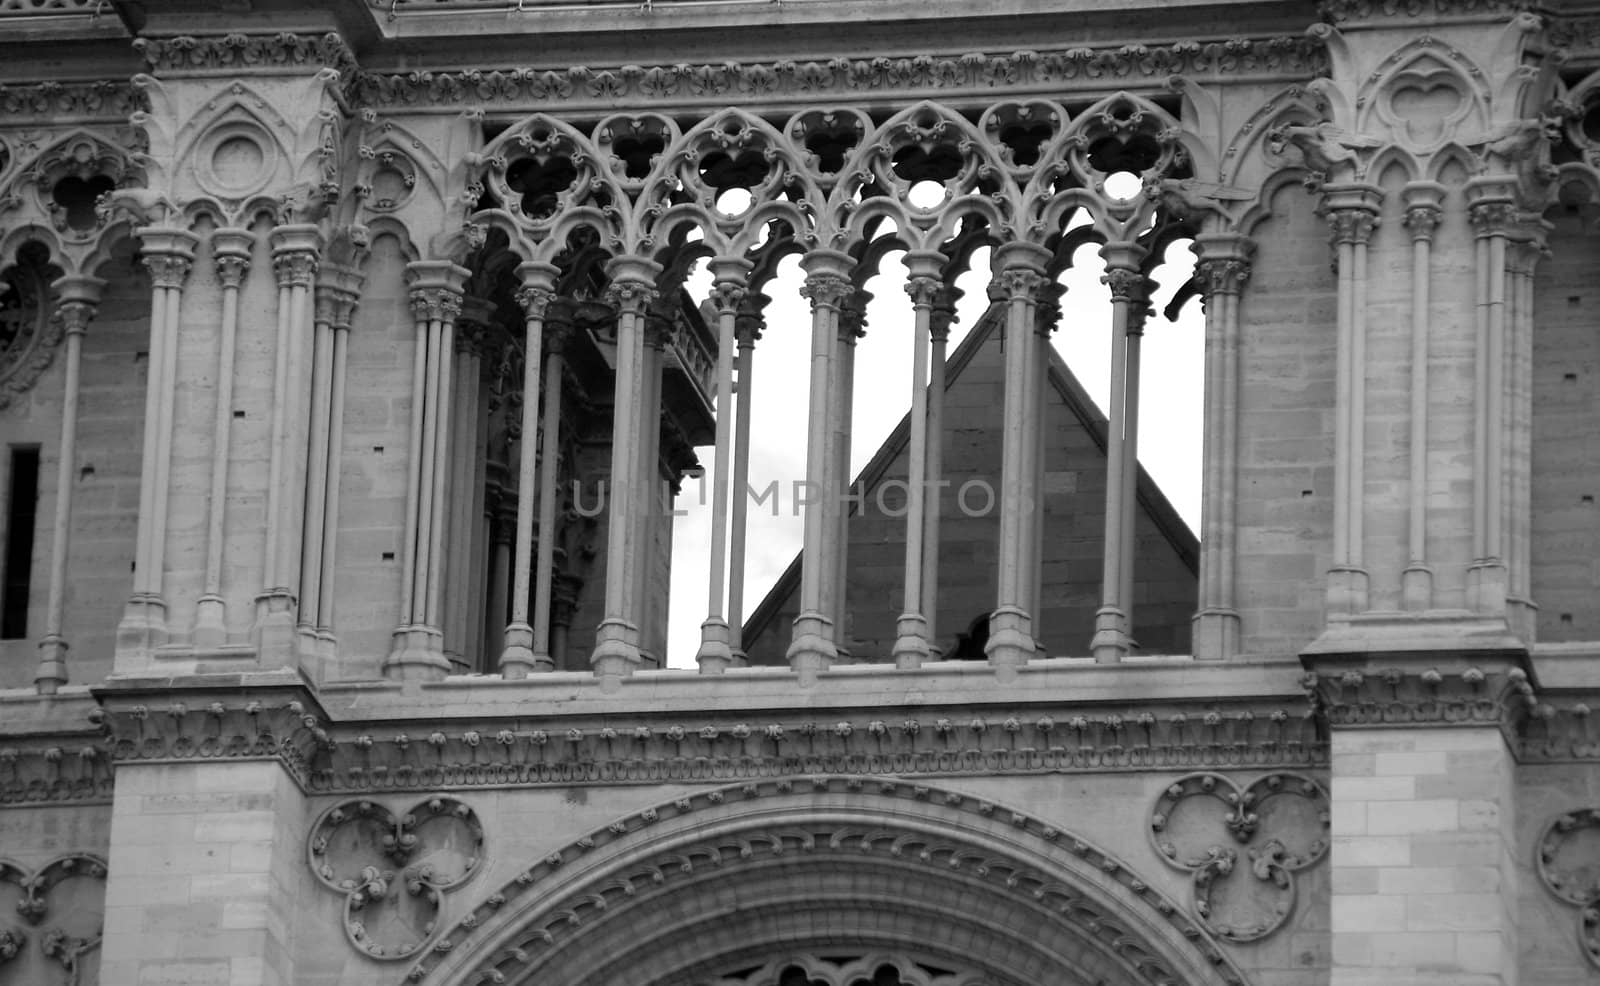 Capital of France - Paris. Notre-Dame. Fragment of the facade.